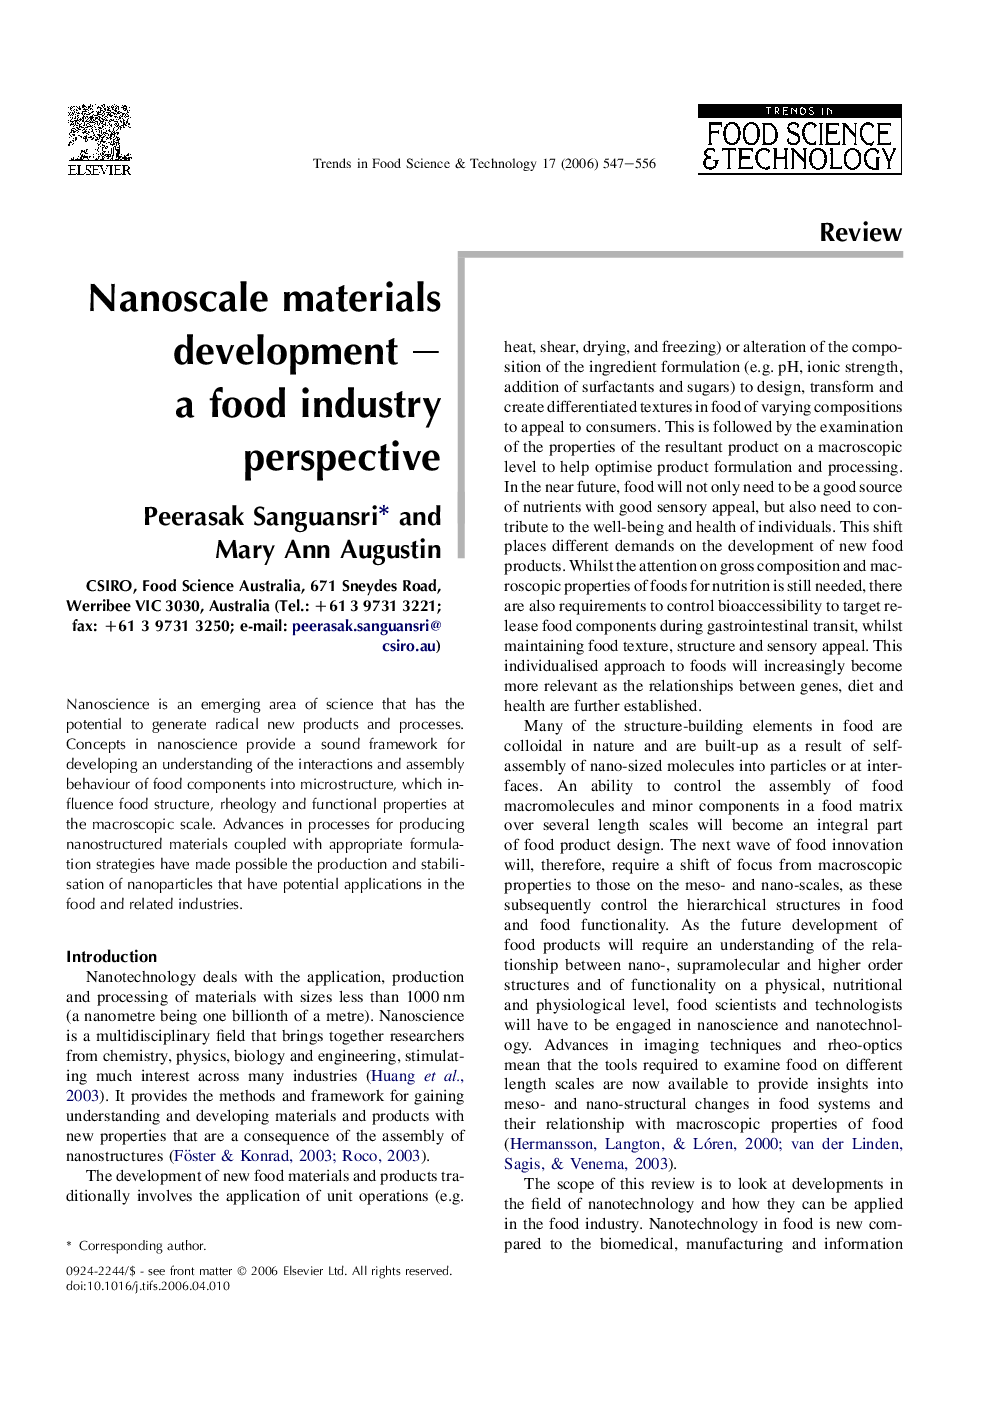 Nanoscale materials development – a food industry perspective